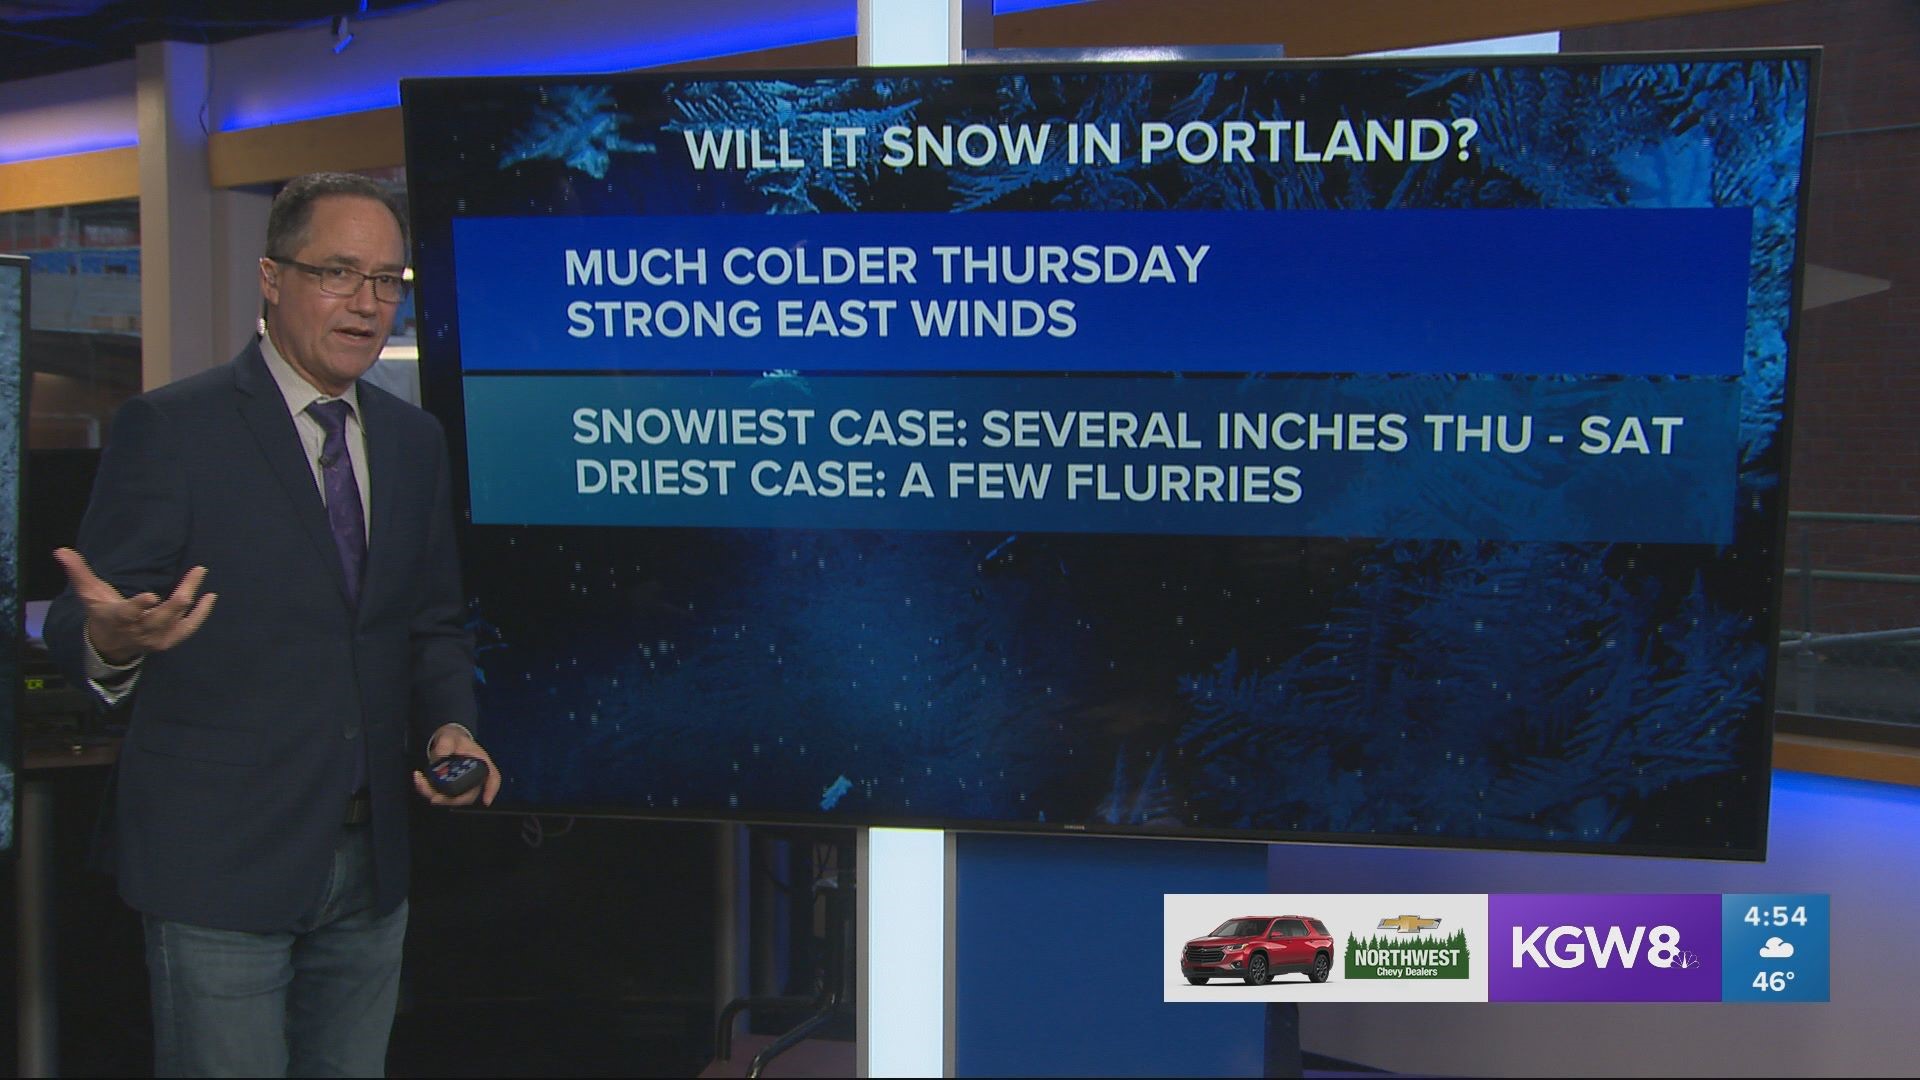 Portland will see the coldest air of the season this week, but whether it snows or not still depends on a lot of different factors. Matt Zaffino explains.